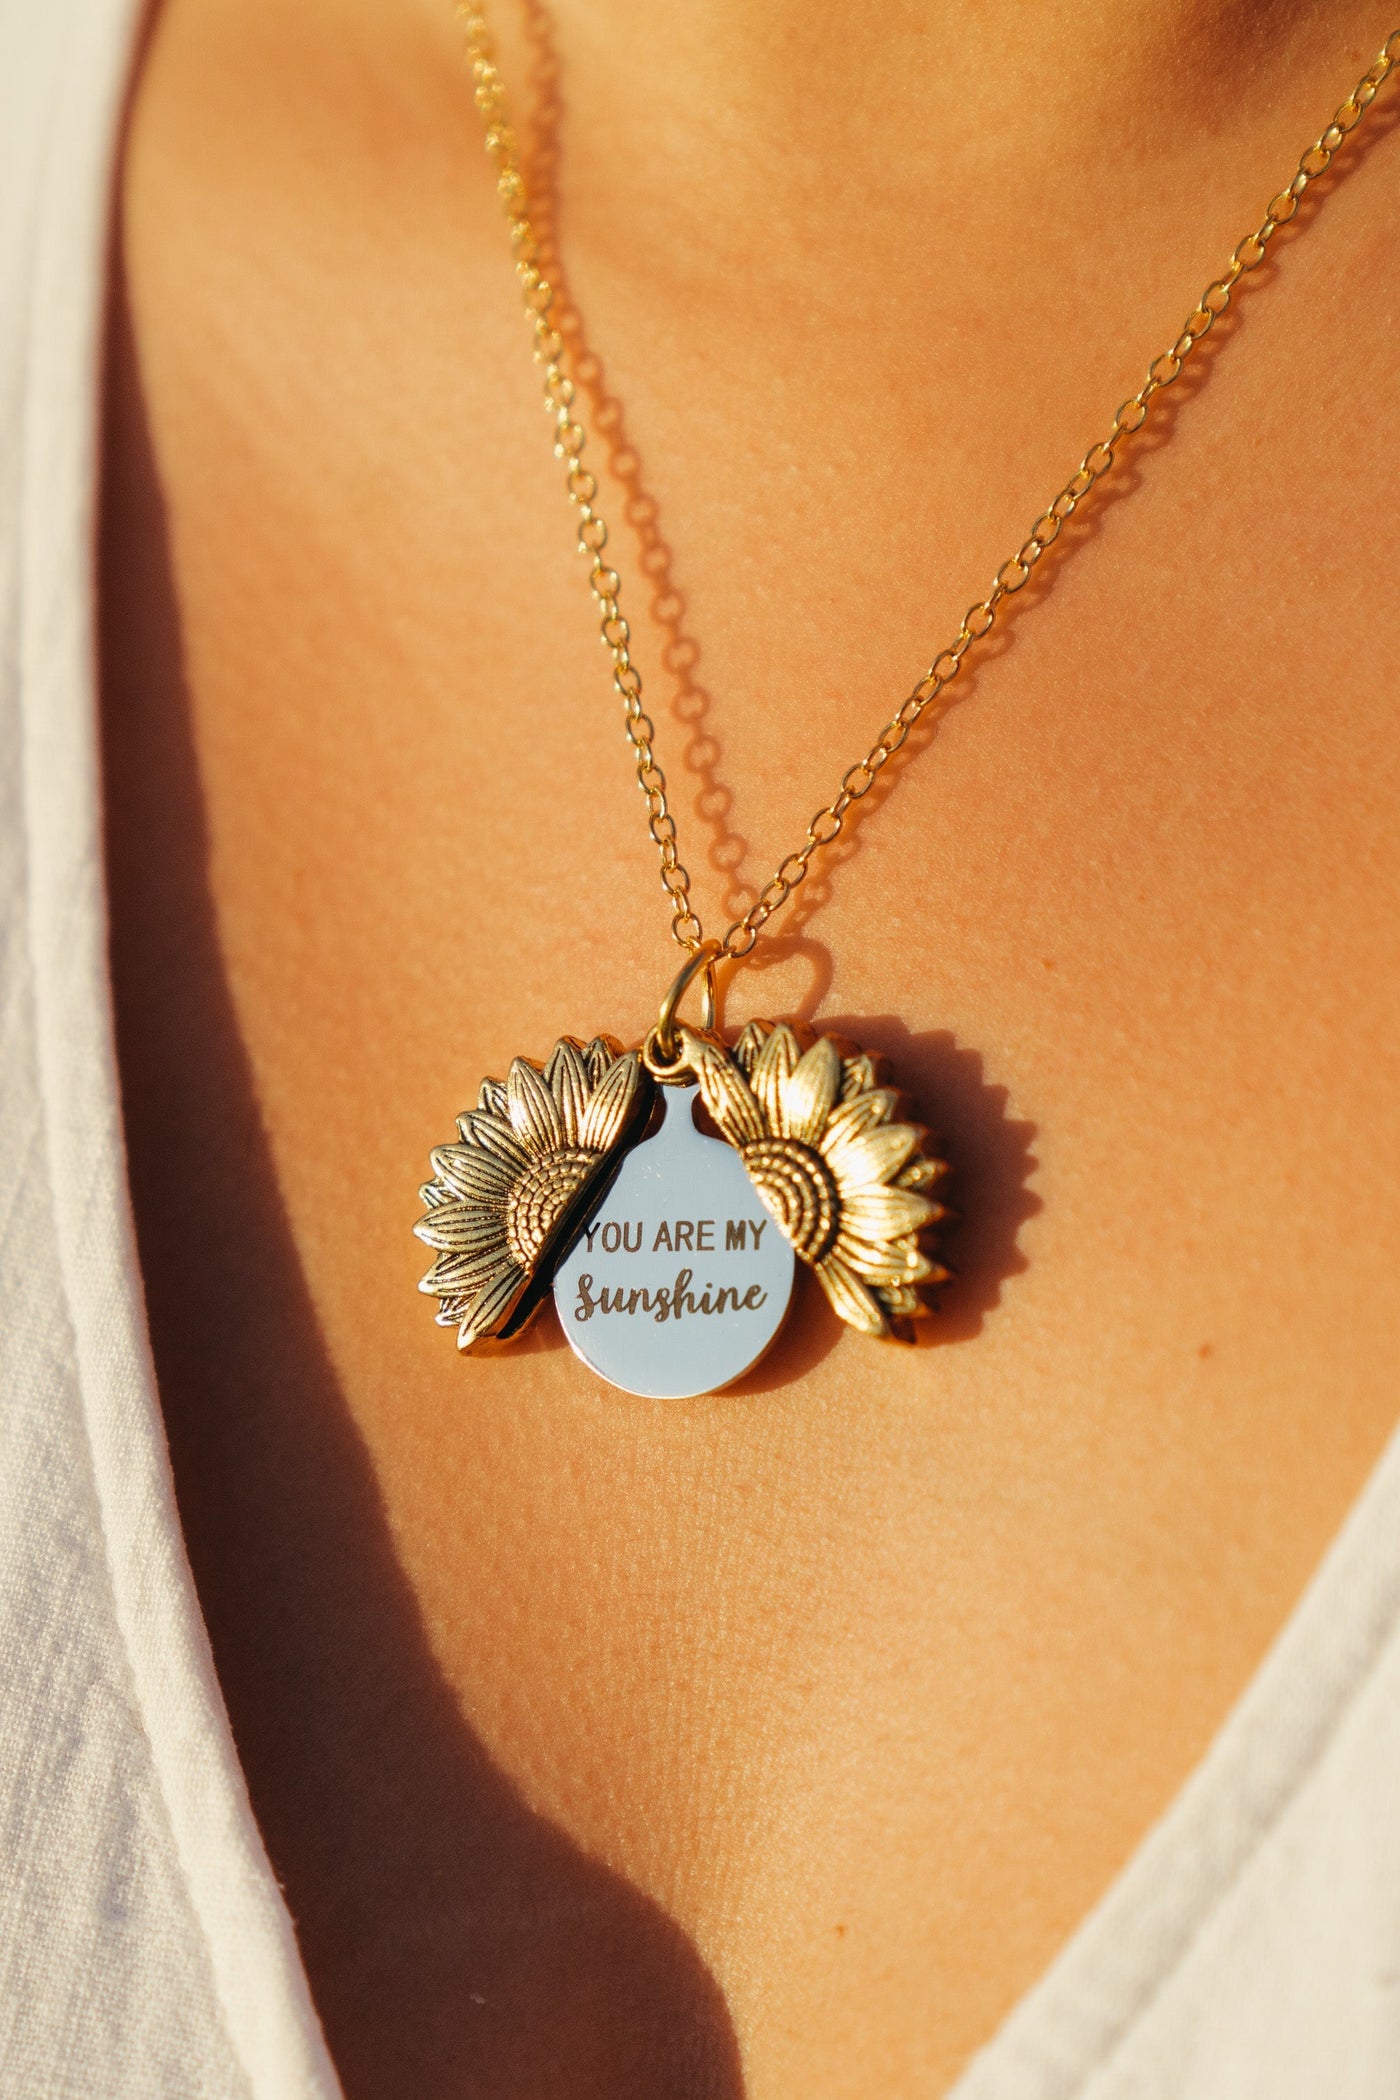 MyLittleSunflower - You are My Sunshine Necklace - Sunflower Necklace  Locket with Engraved Hidden Message Pendant for Women, Mother, Daughter | Sunshine  necklace, Sunflower necklace, Sunflower pendant